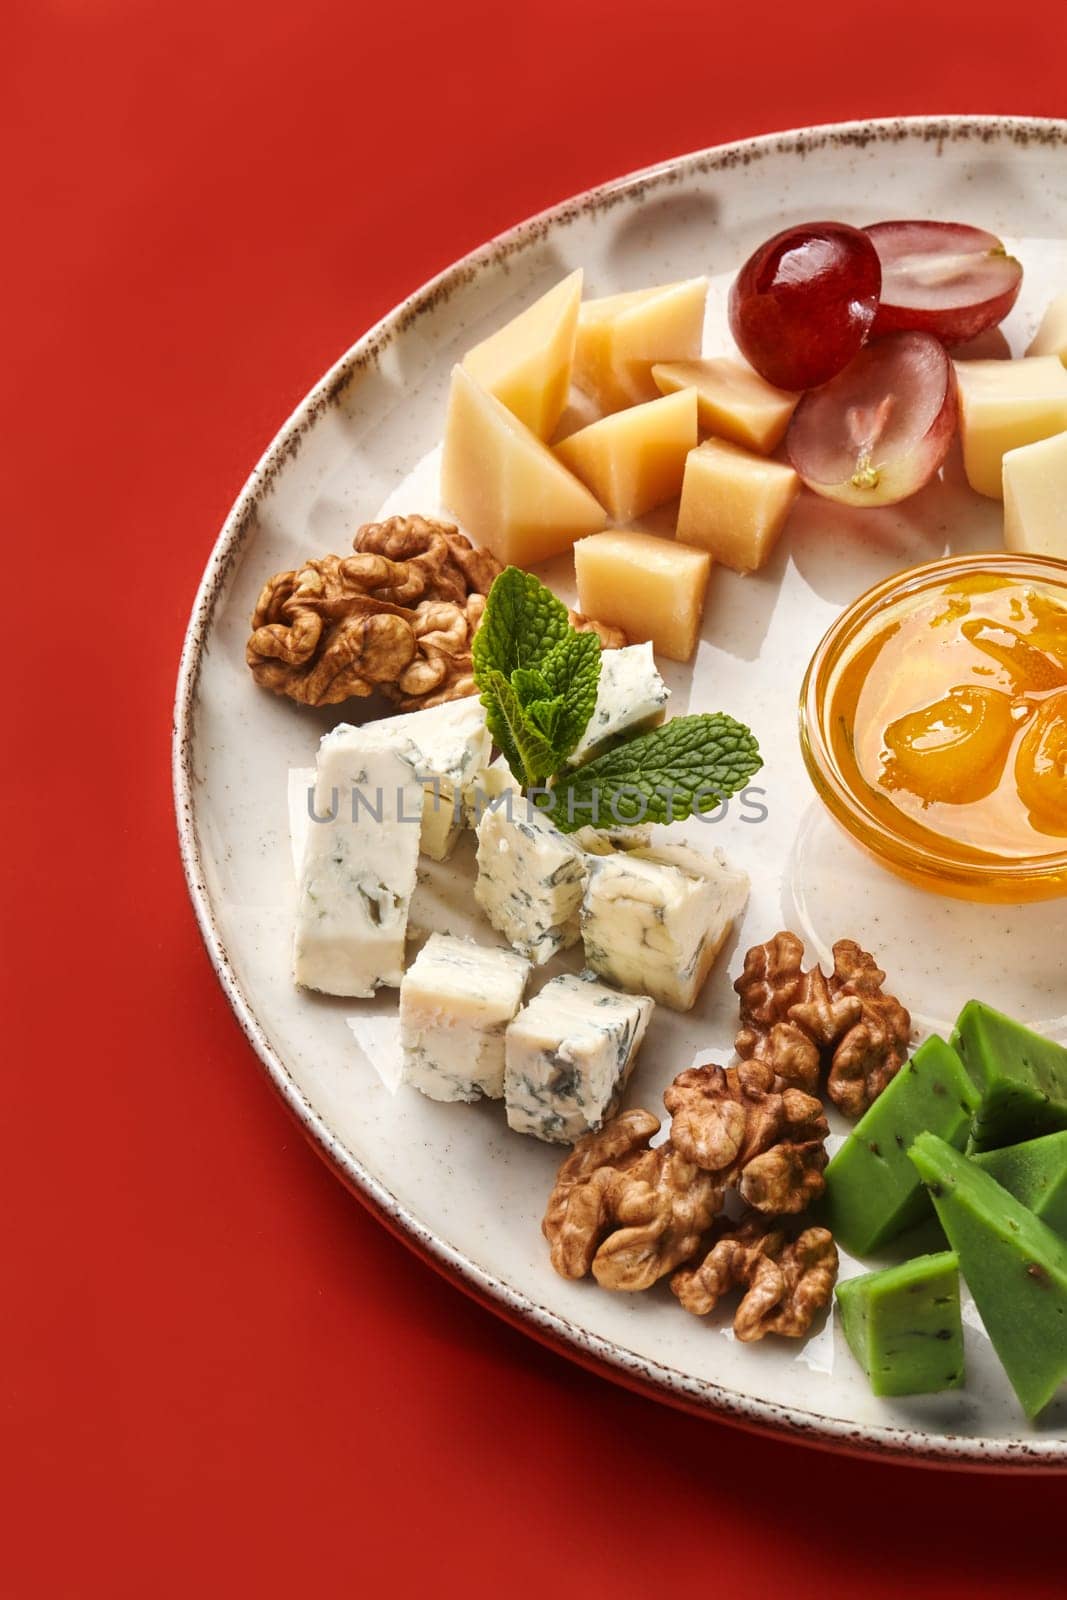 Artfully served artisan cheese board featuring blue and green pesto cheeses, purple grapes, walnuts, and sweet honey on ceramic dish with rich red backdrop. Popular Italian style snack